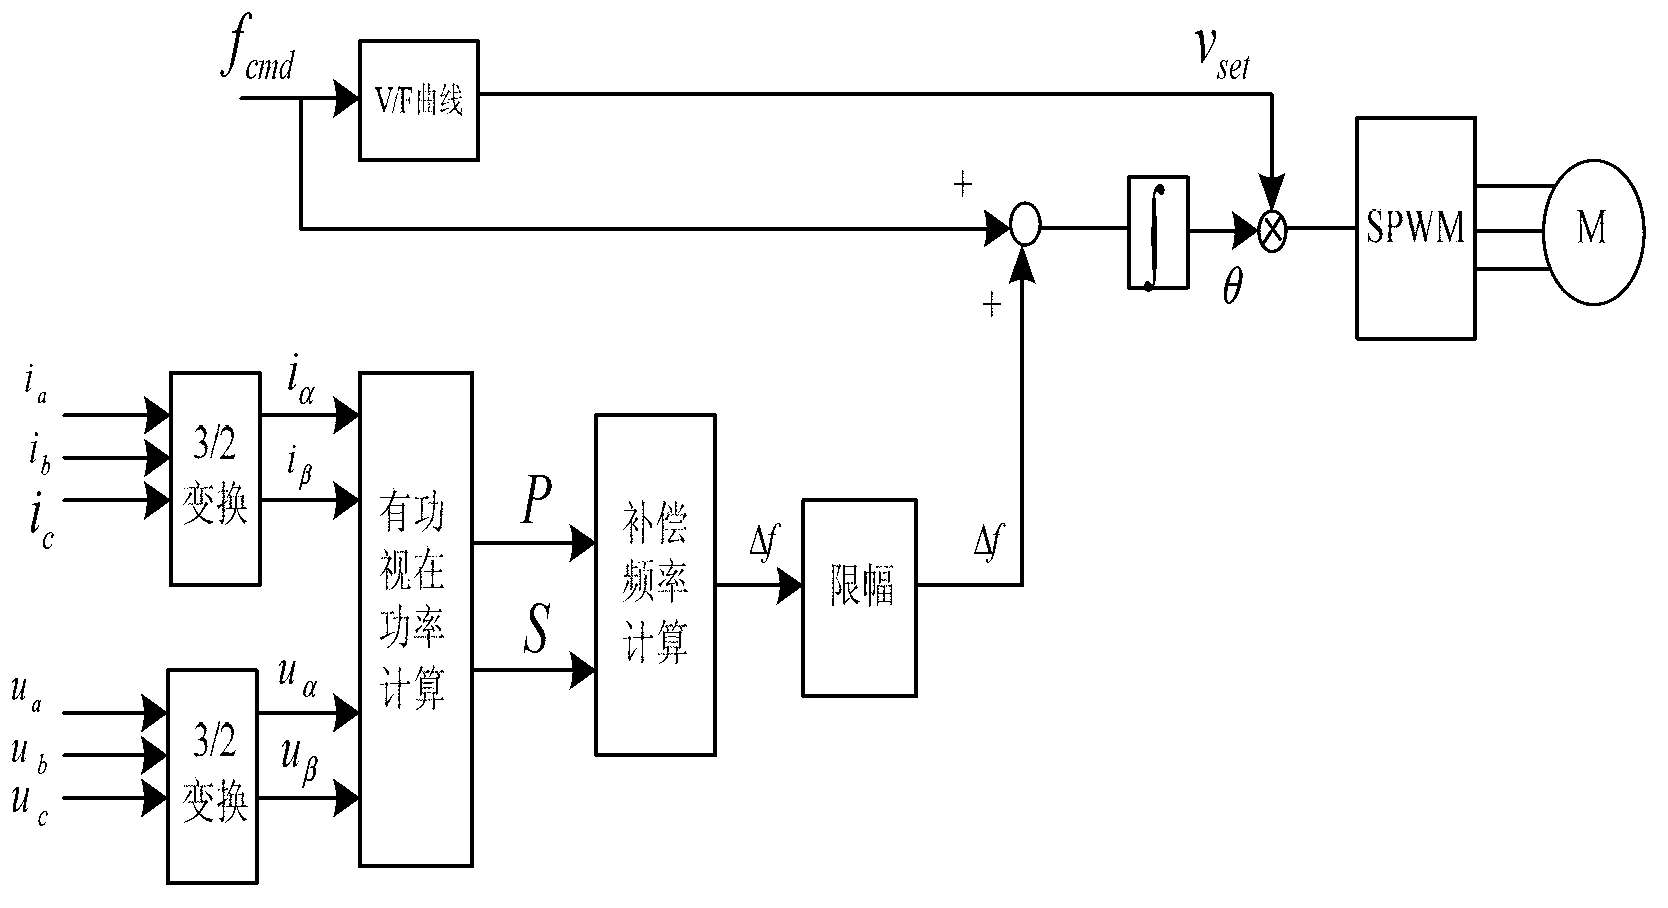 Method for realizing stable operation of frequency converter under V/F (voltage/frequency) control